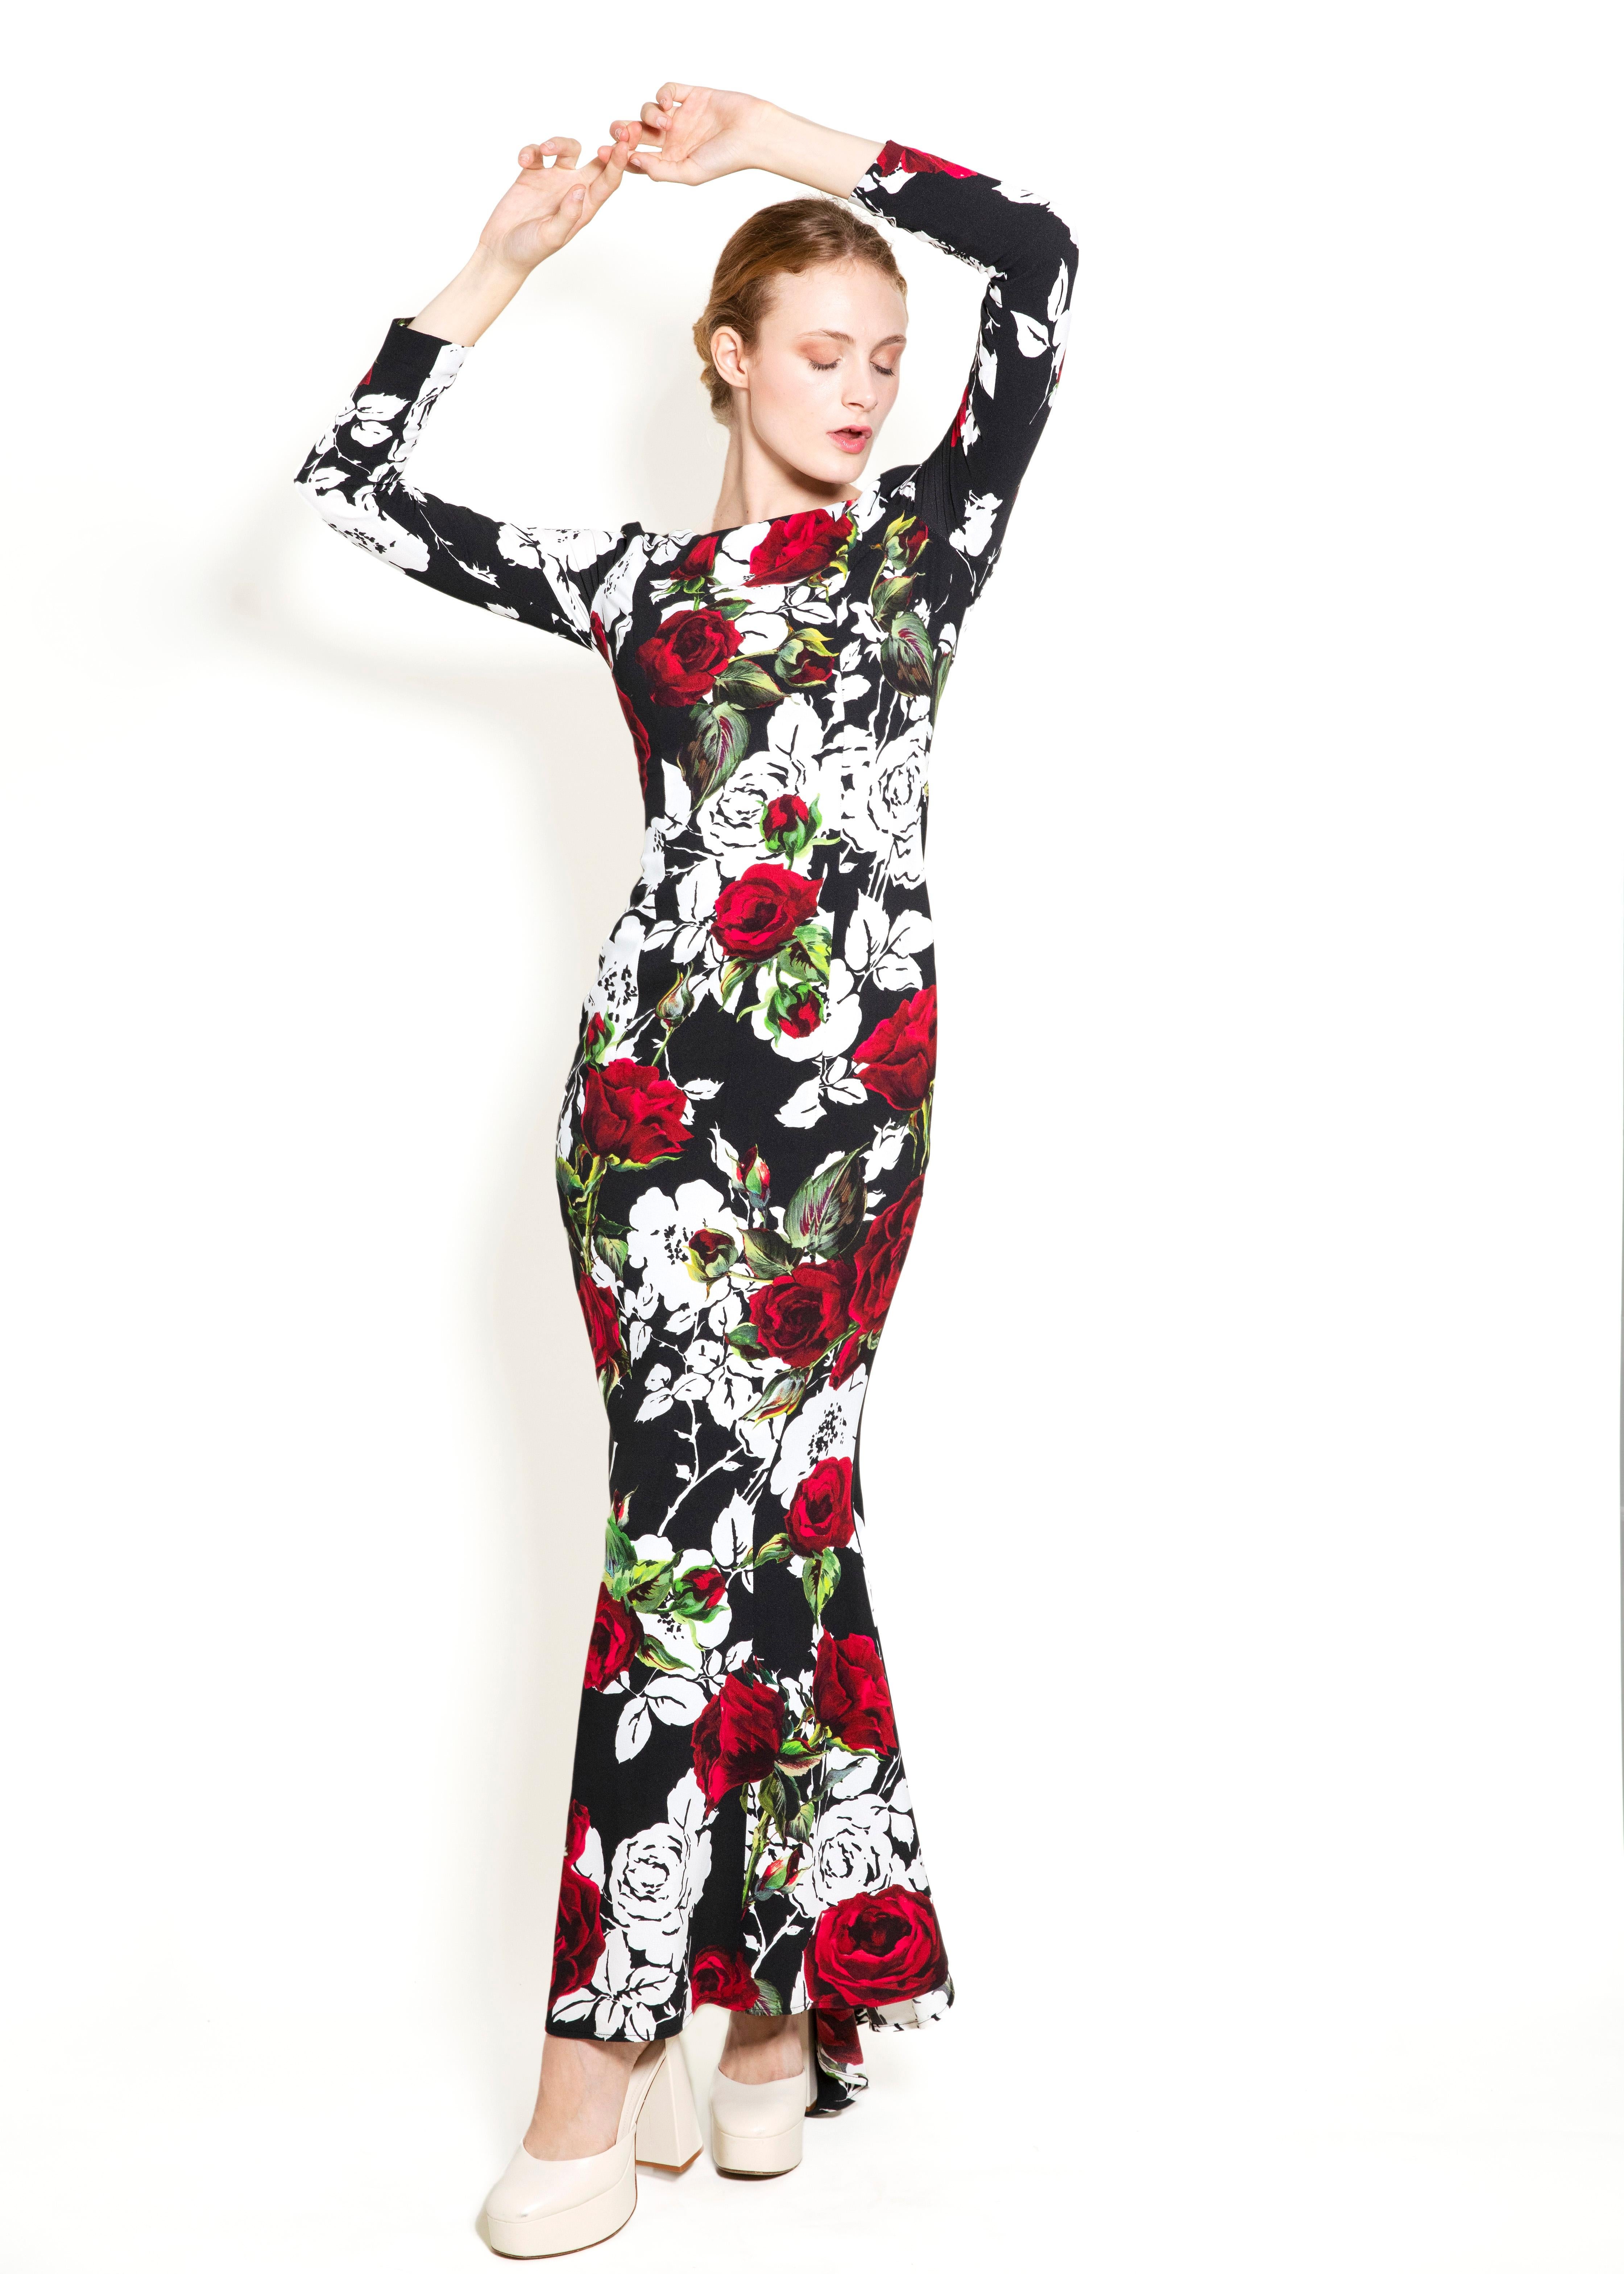 Dolce & Gabbana Fall 2015 L/S Floral Dress For Sale 1